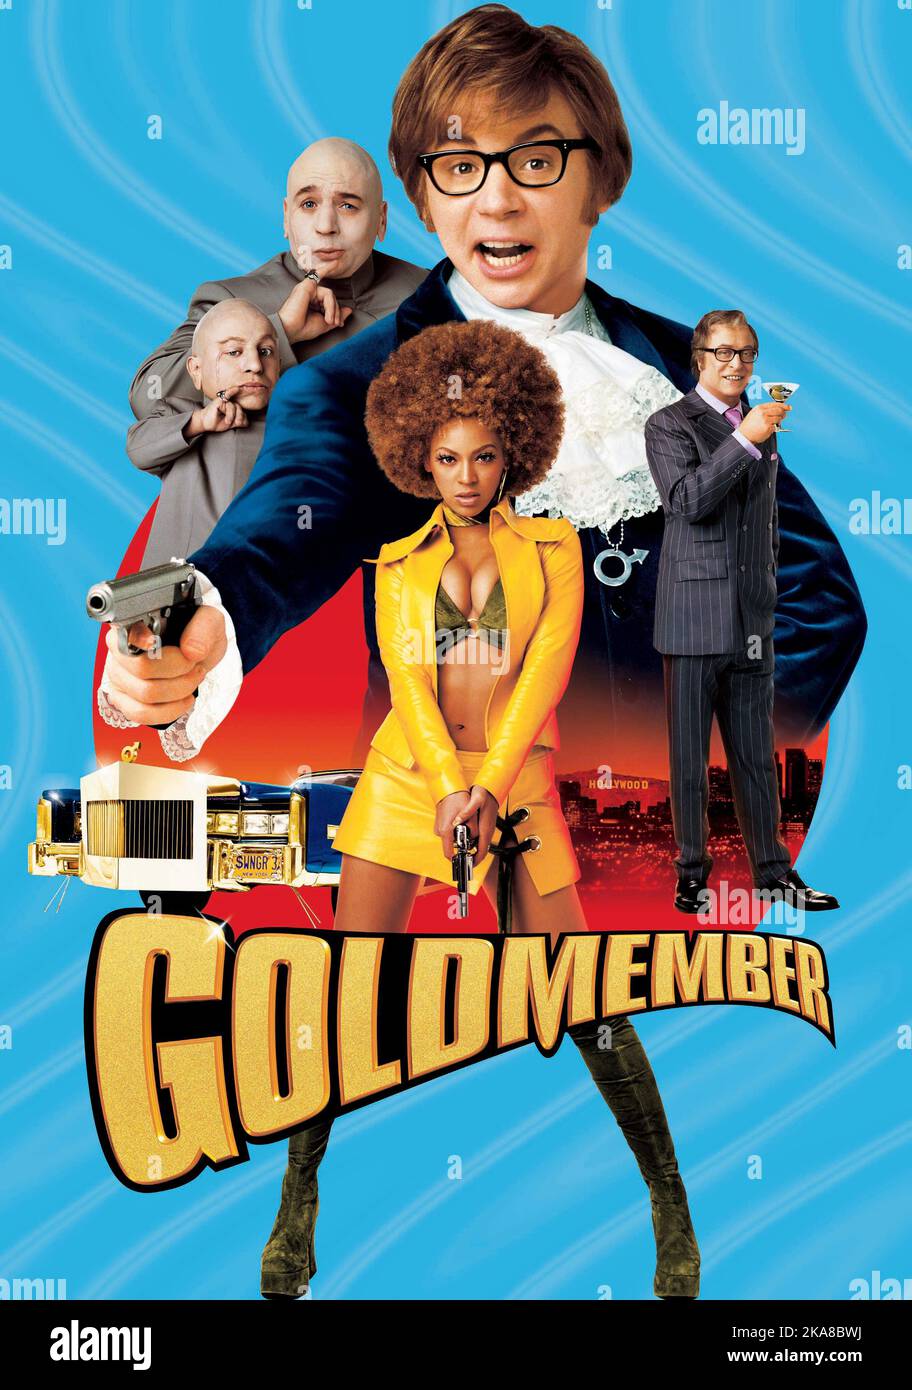 Austin Powers in Goldmember poster Goldmember Mike Myers Foto Stock